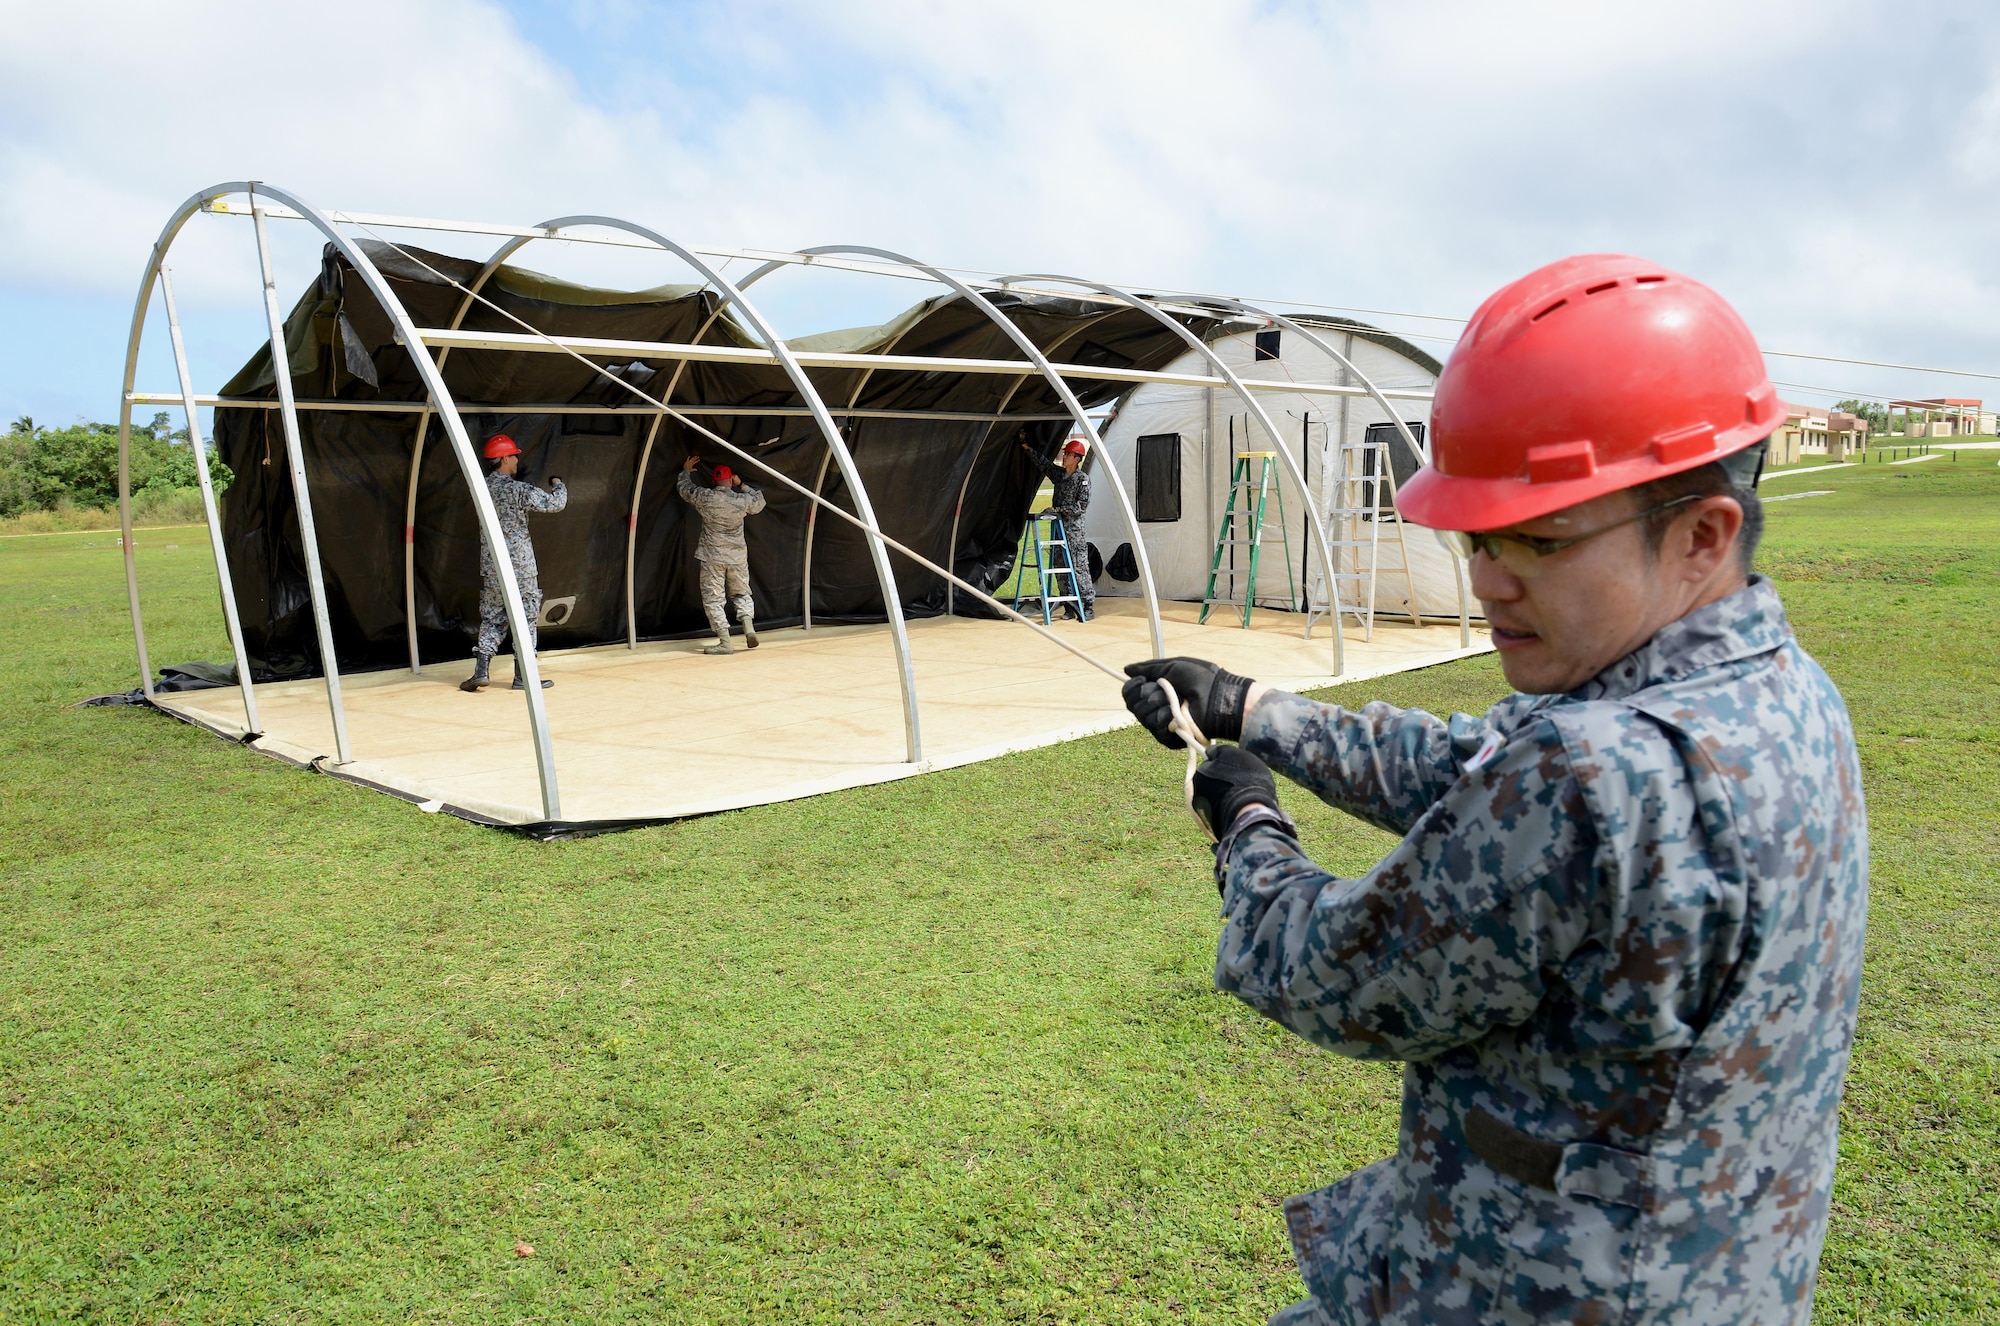 Japan Air Self-Defense Force Staff Sgt. Makoto Mizuhara pulls on a rope during Silver Flag Dec. 5, 2016, at Northwest Field, Guam. U.S. Air Force and JASDEF Airmen spent a week sharing civil engineering techniques to build partnerships and promote interoperability. (U.S. Air Force photo by Senior Airman Arielle K. Vasquez/Released)